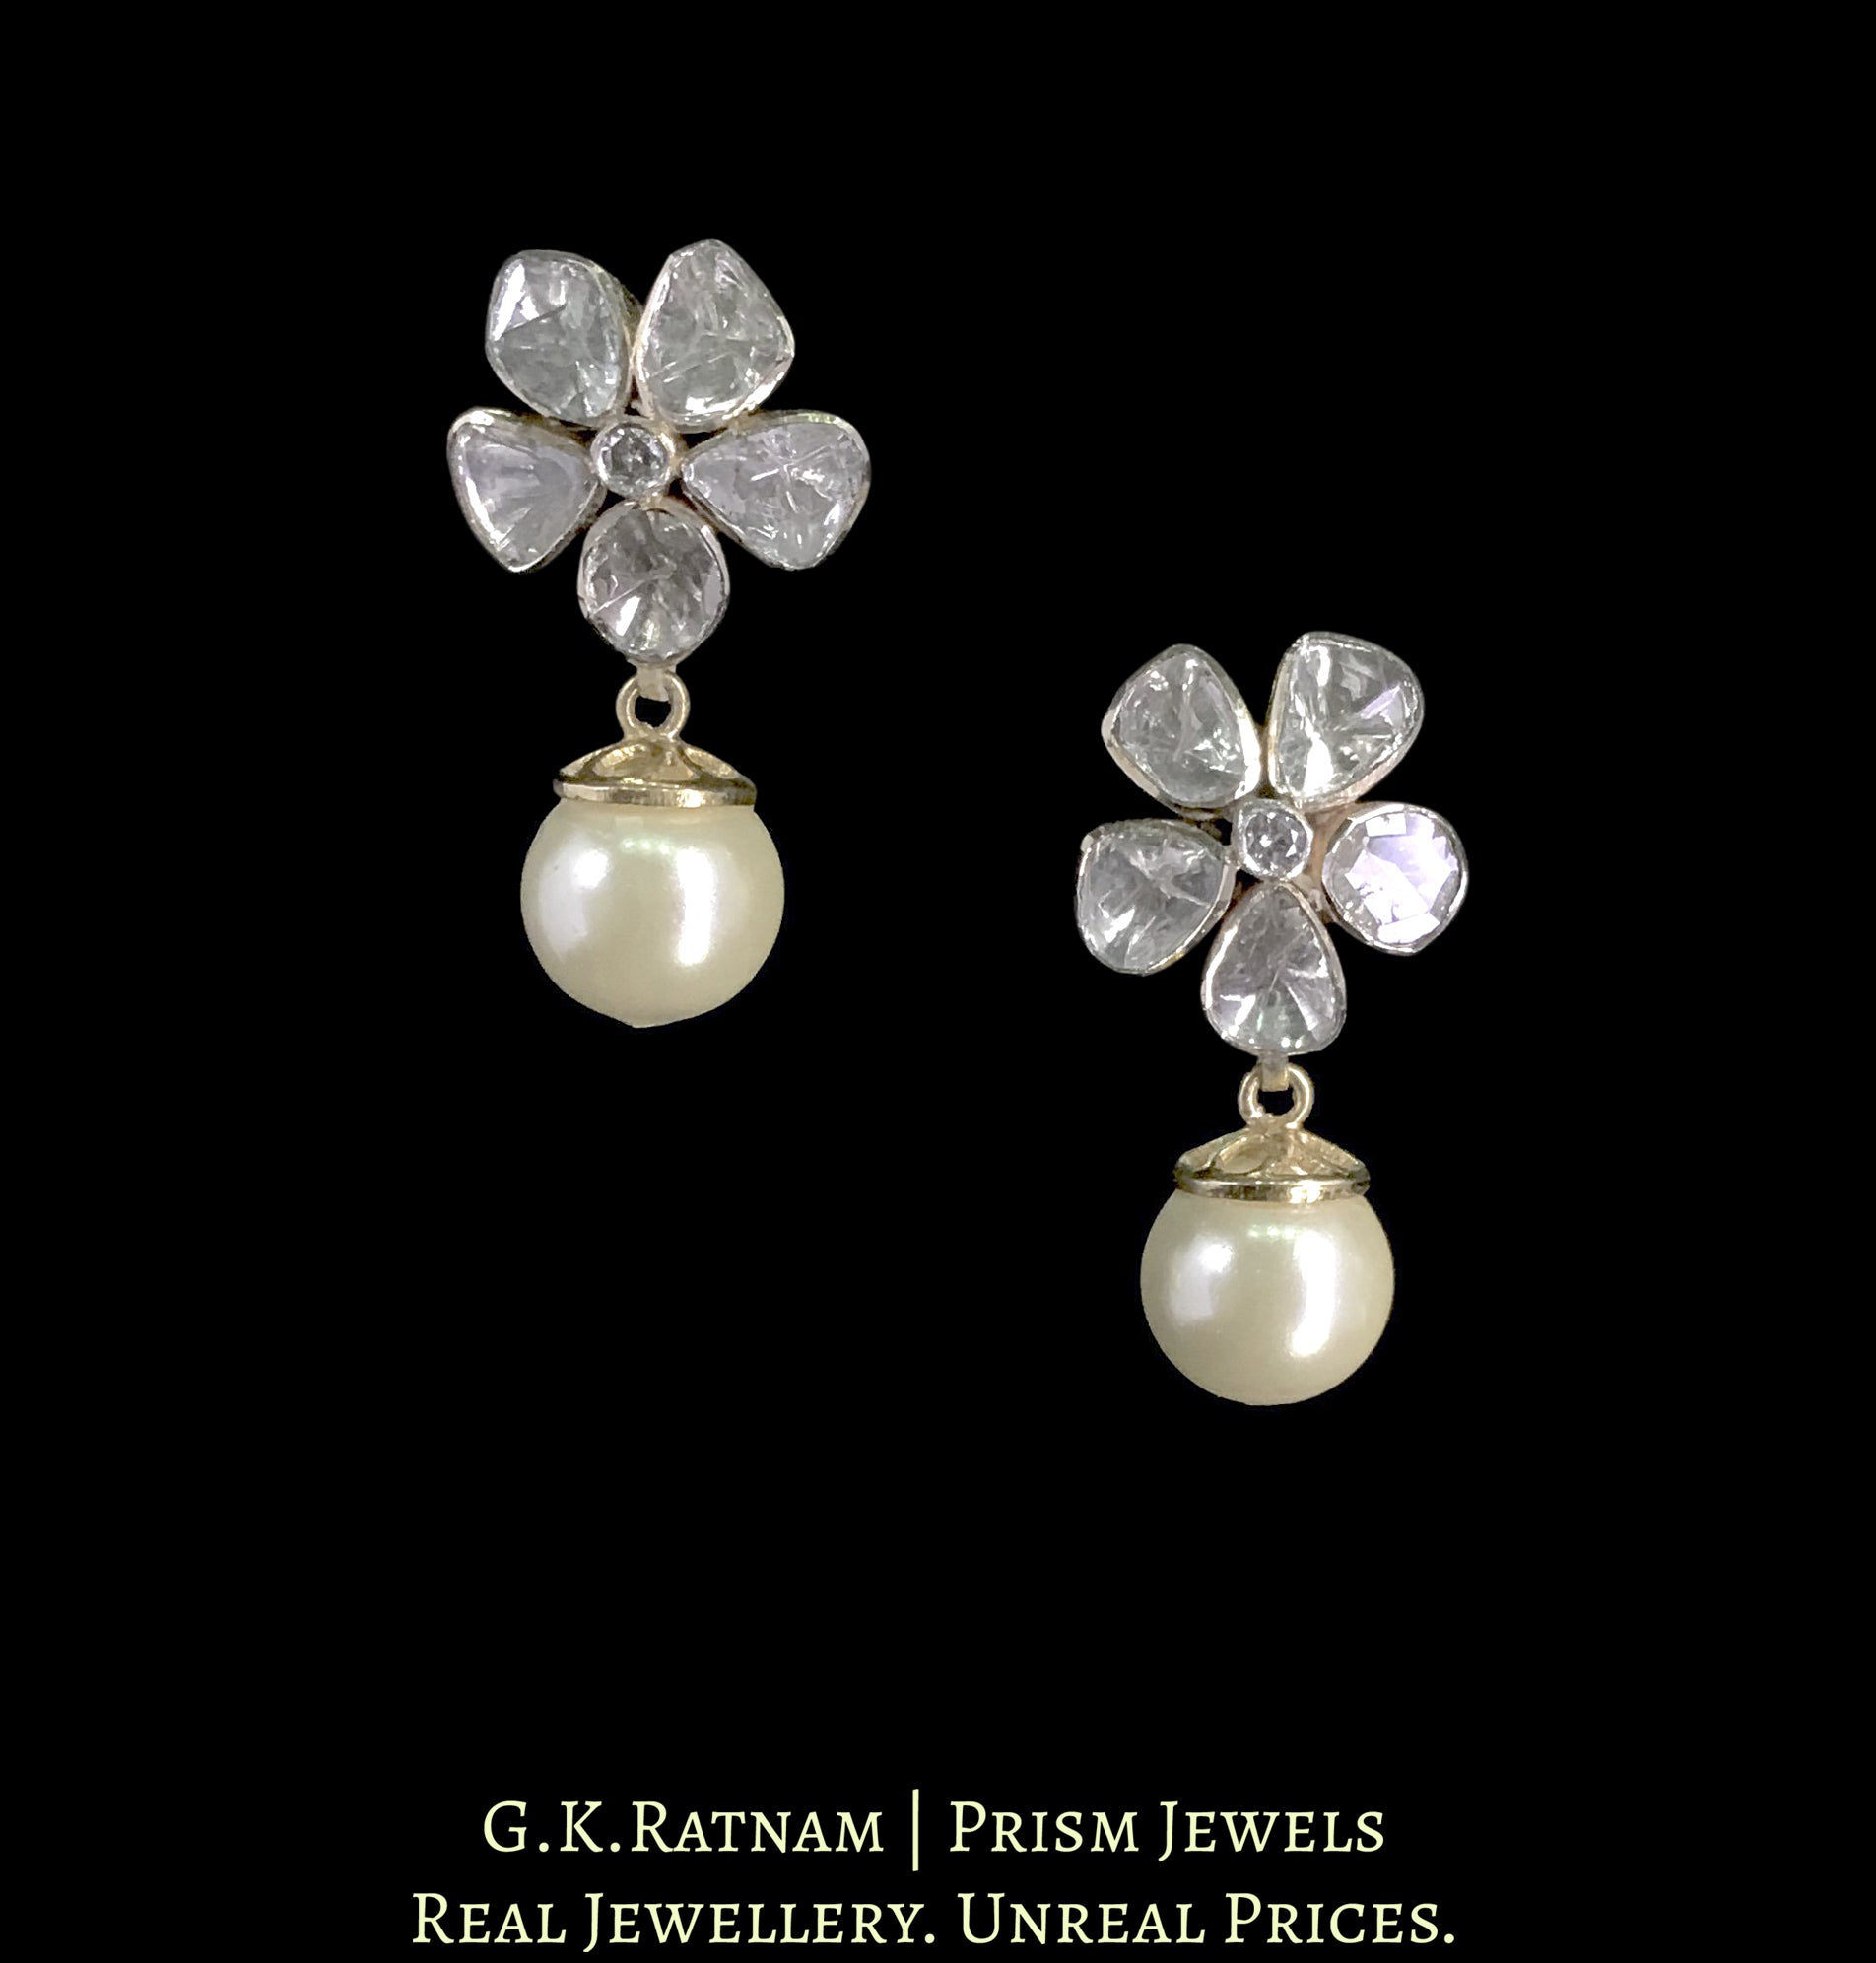 14K Gold Diamond Polki Floral Tops / Studs Earring Pair with Pearl Hangings